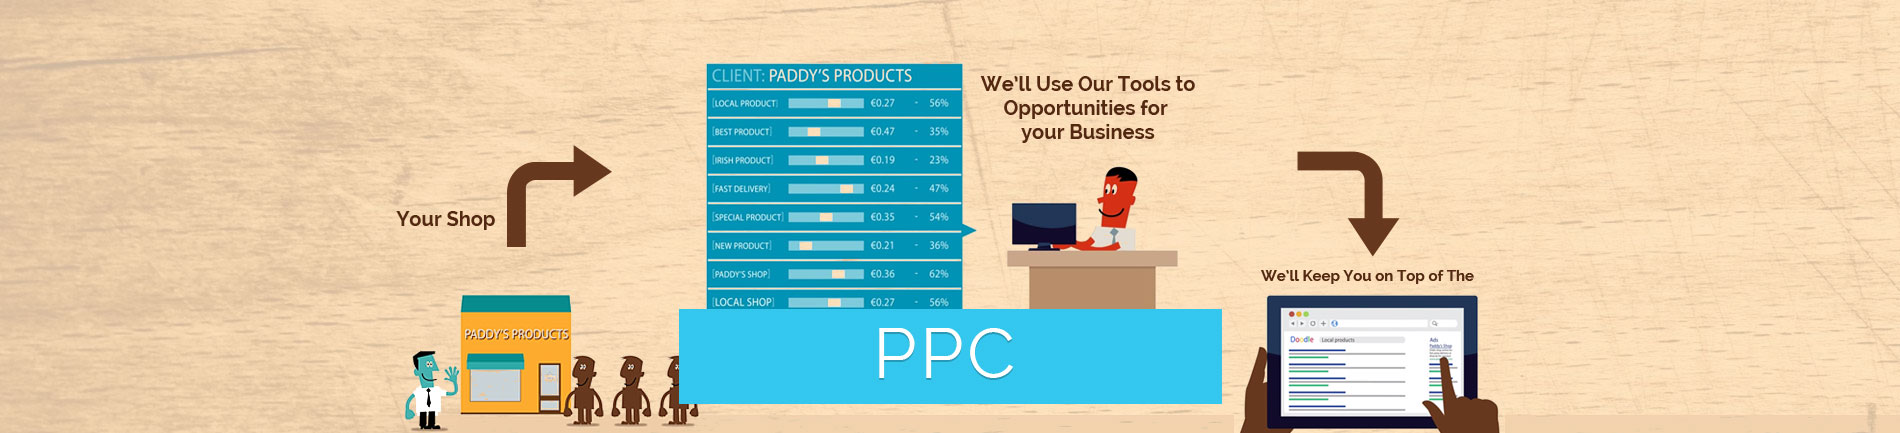 Improve Online Sales with an Effective PPC Campaign